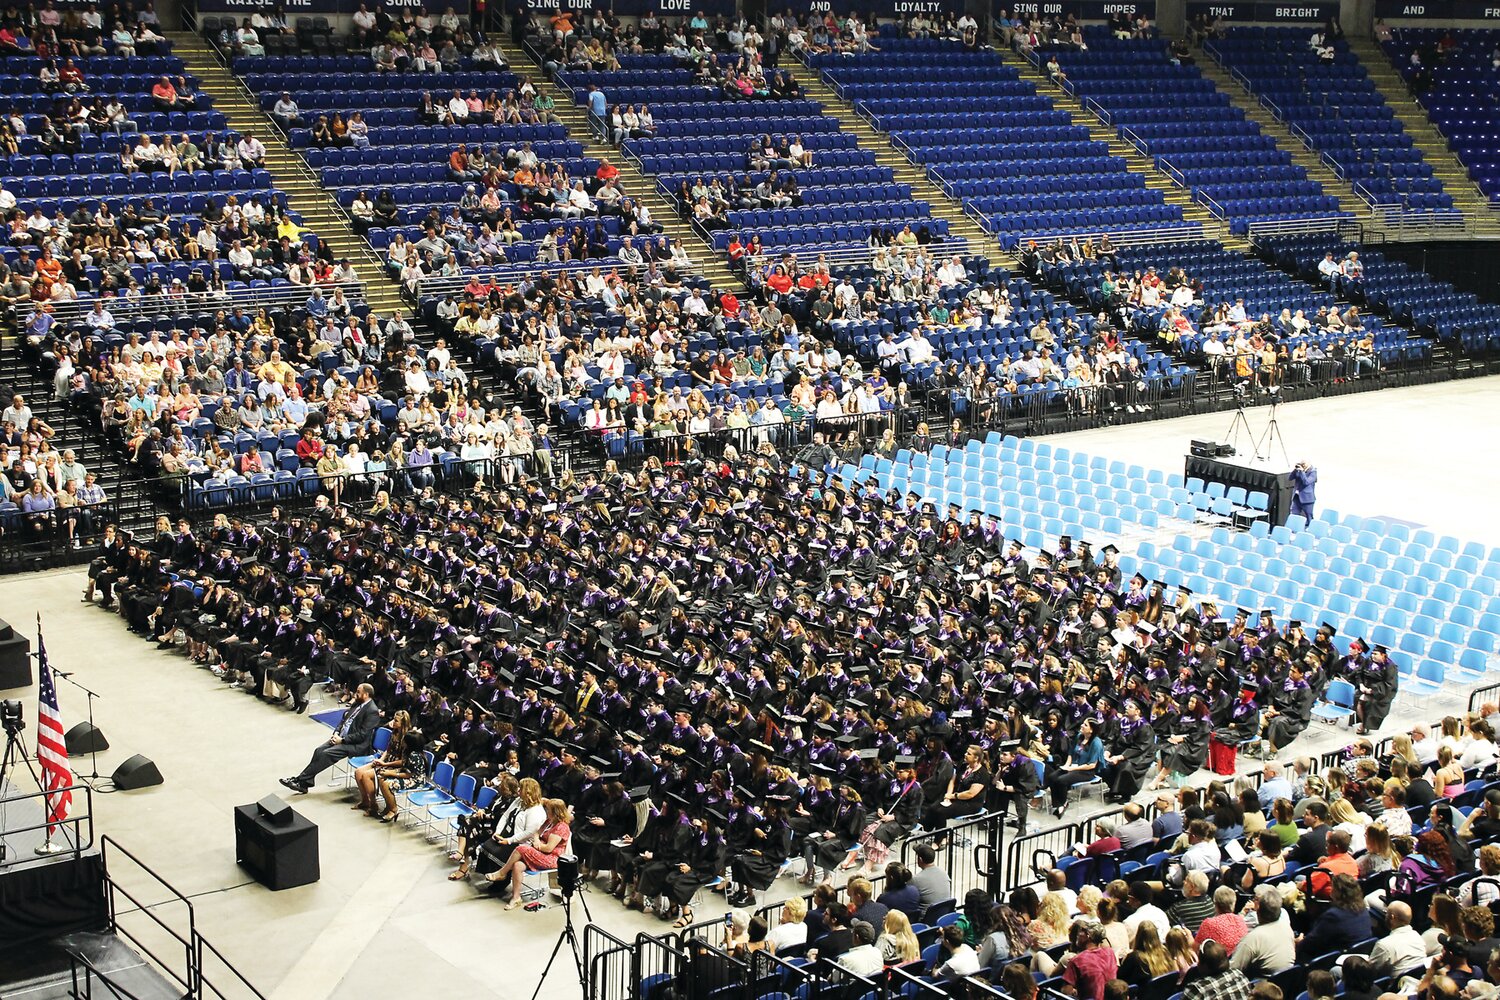 Reach Cyber Charter School’s Class of 2023, including 33 students from Bucks County, graduated on June 8. Commencement was held at Bryce Jordan Center in State College.